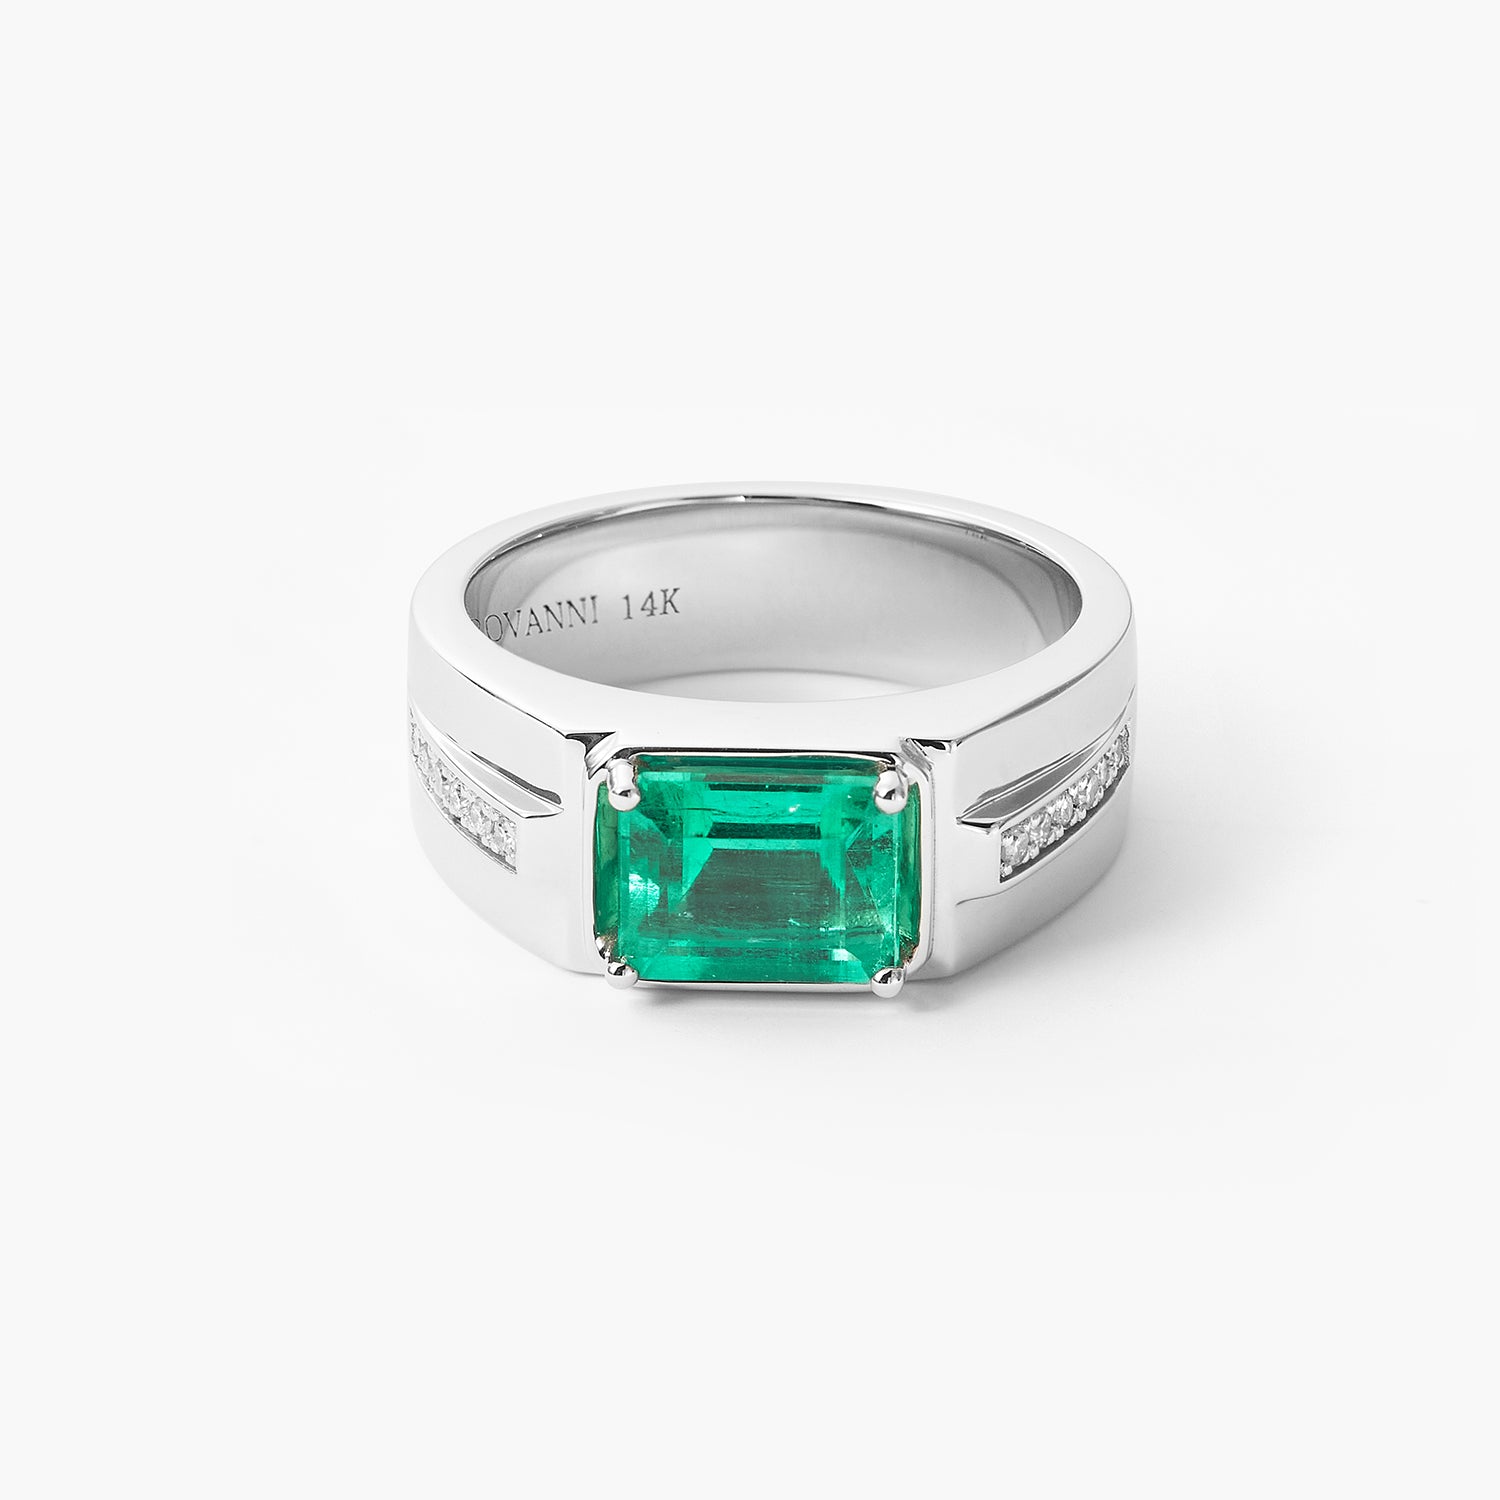 Exceptional Natural Emerald Ring SJ R 652